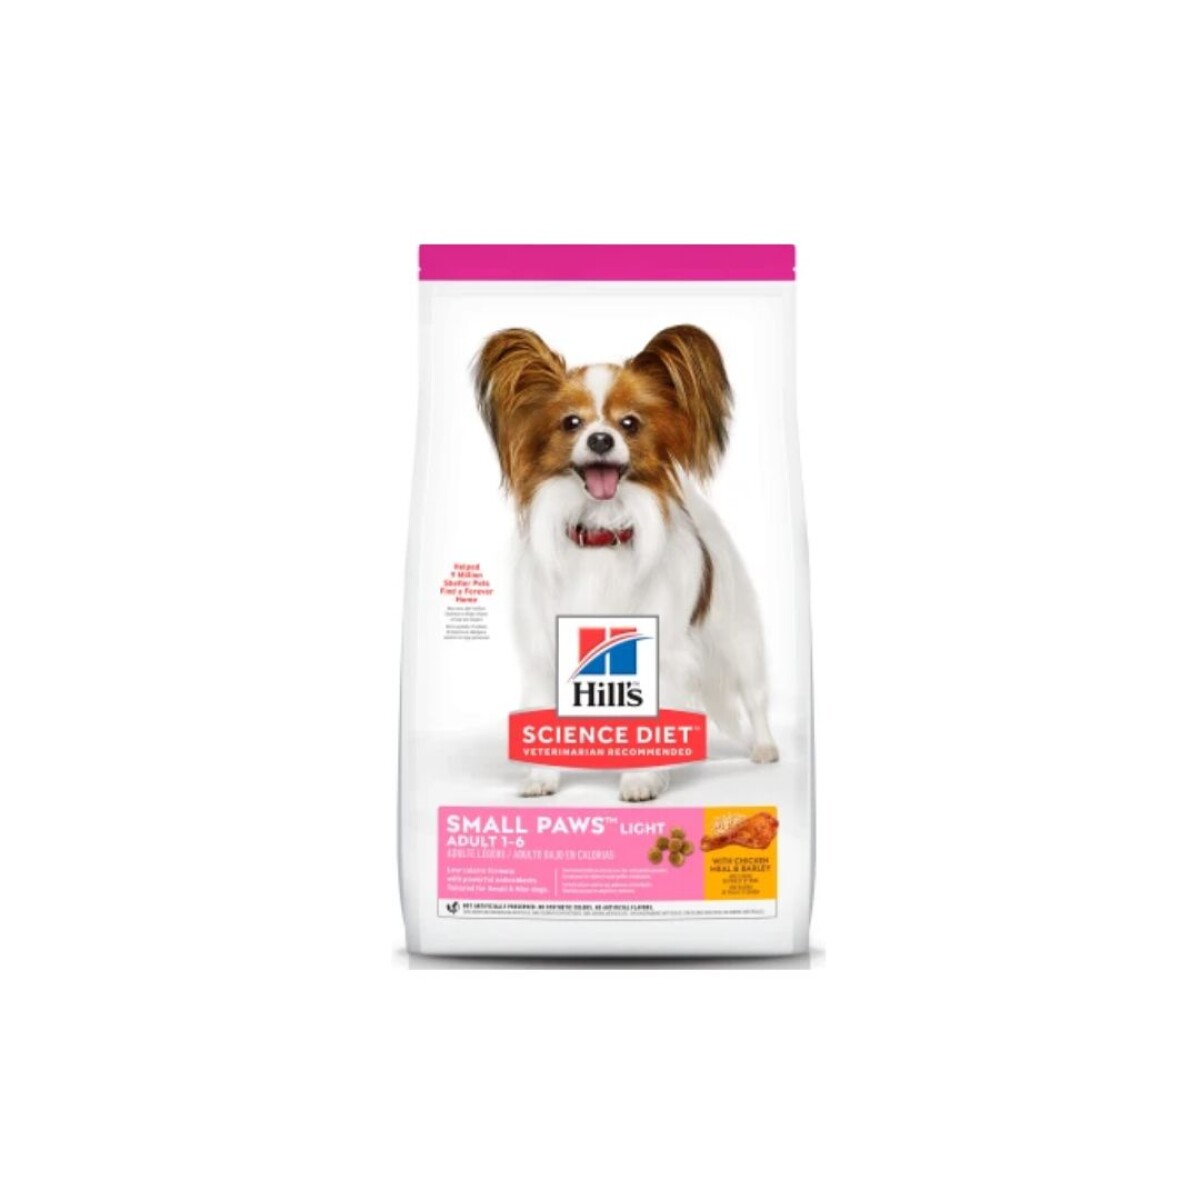 HILLS LIGHT SMALL PAWS 2.04 KG - Unica 